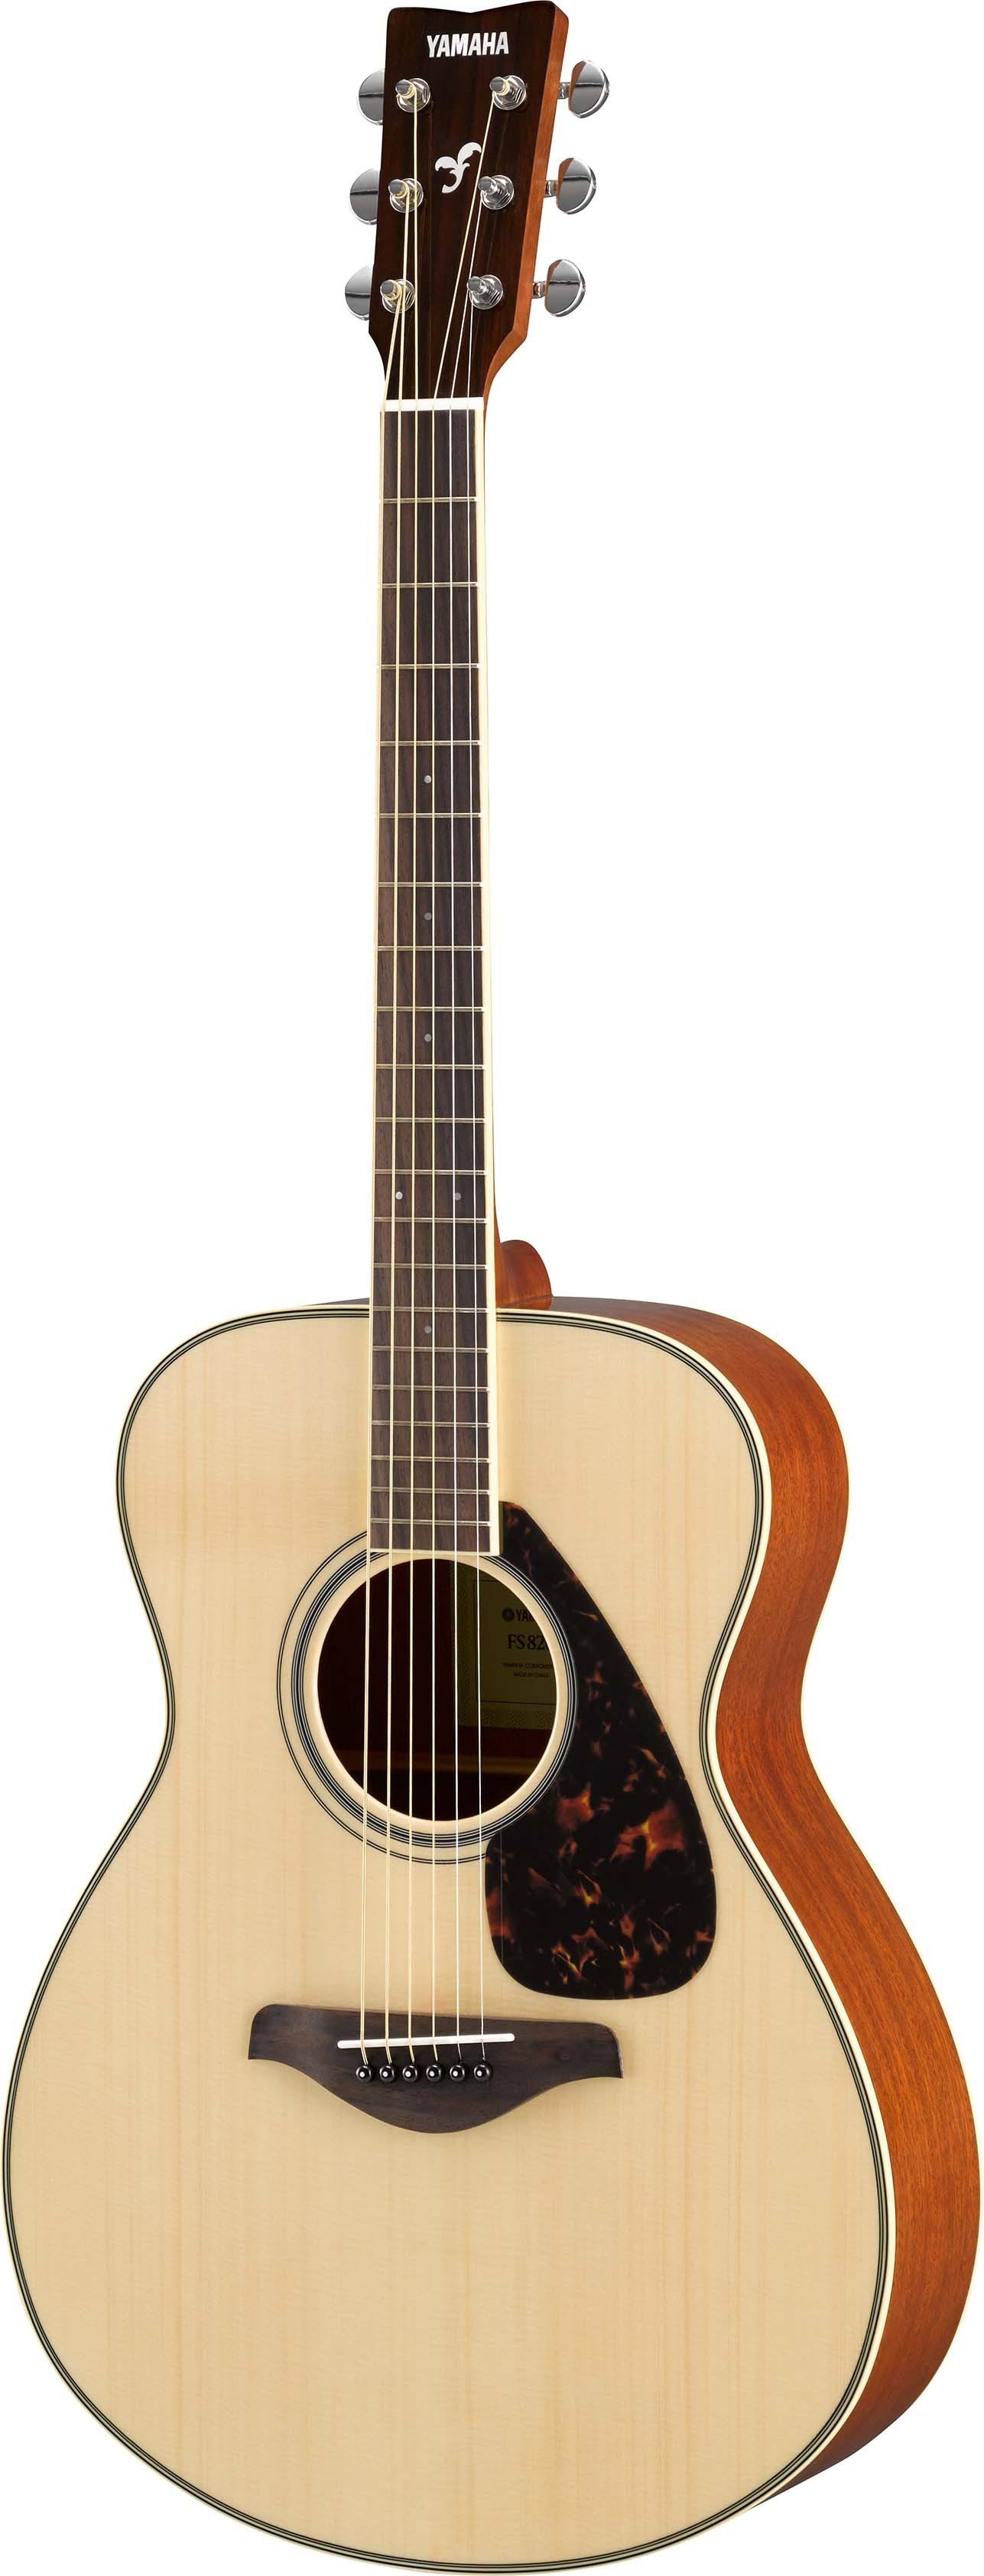 Yamaha FS820 Small Body Solid Top Acoustic Guitar - Natural